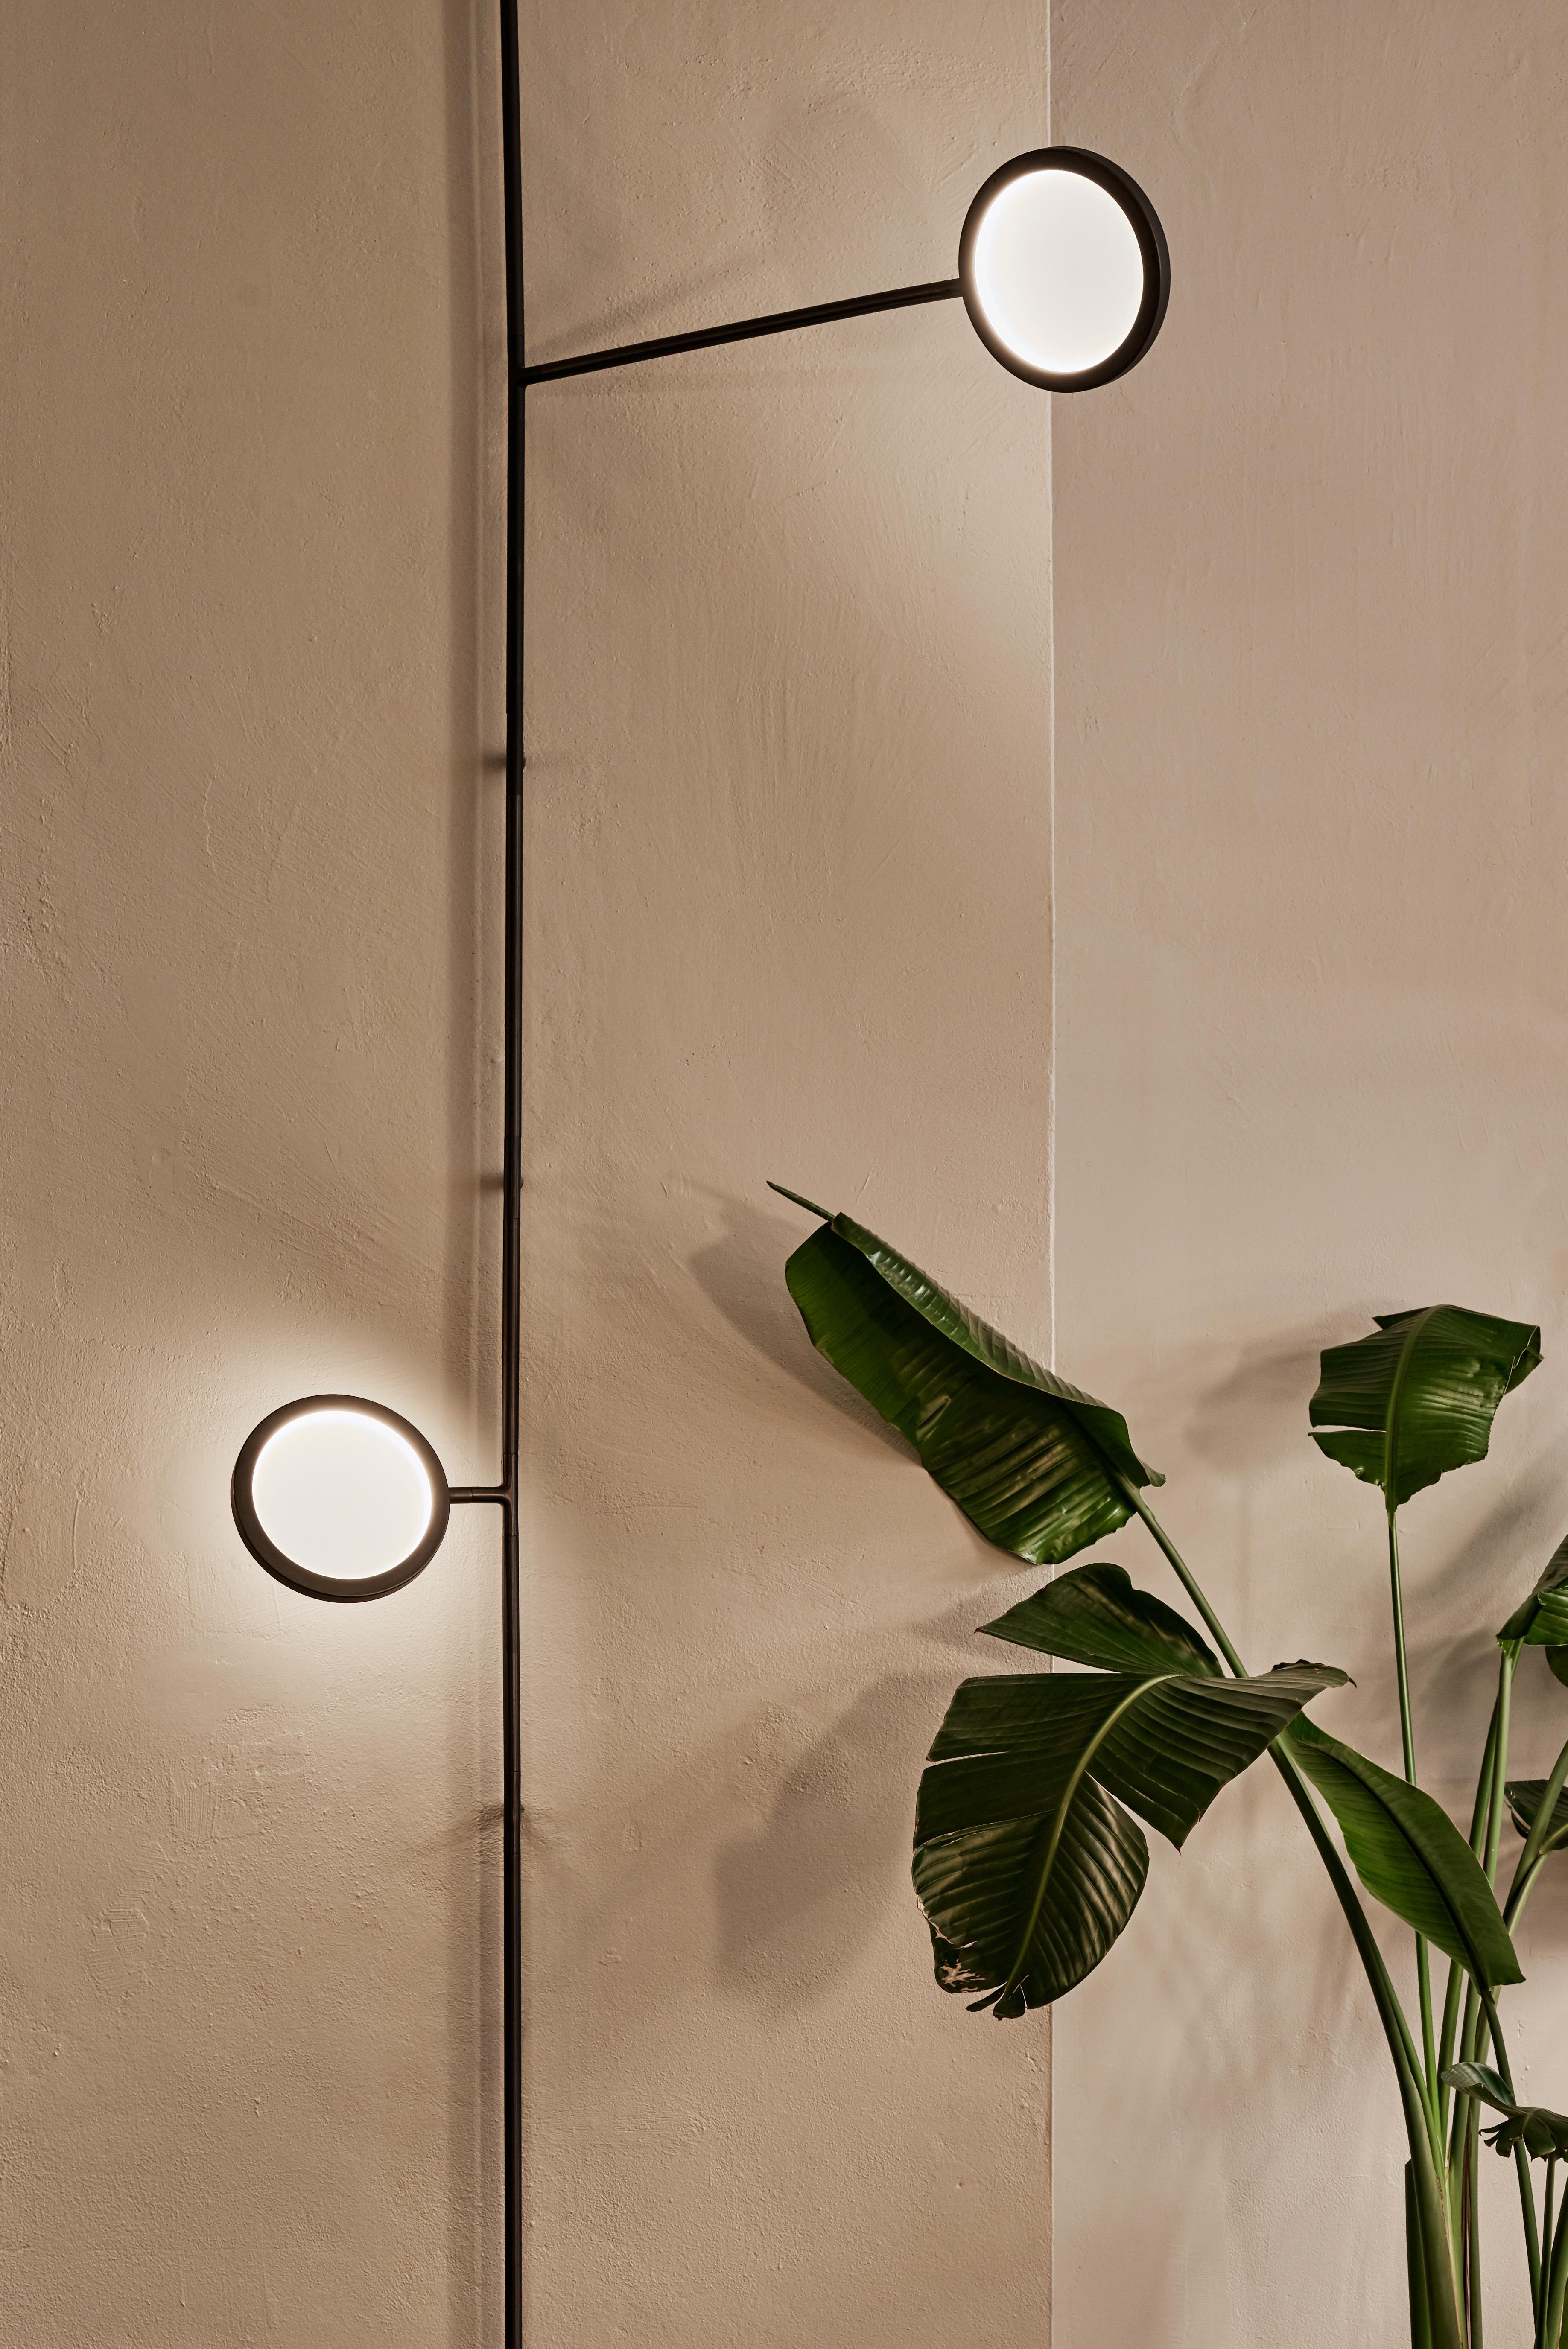 Discus is a spare and graphically compelling lighting collection. Made from modular components, the design is adaptable for spaces ranging from intimate to monumental. Dimmable LEDs cast a warm diffused light through both sides of each rotatable